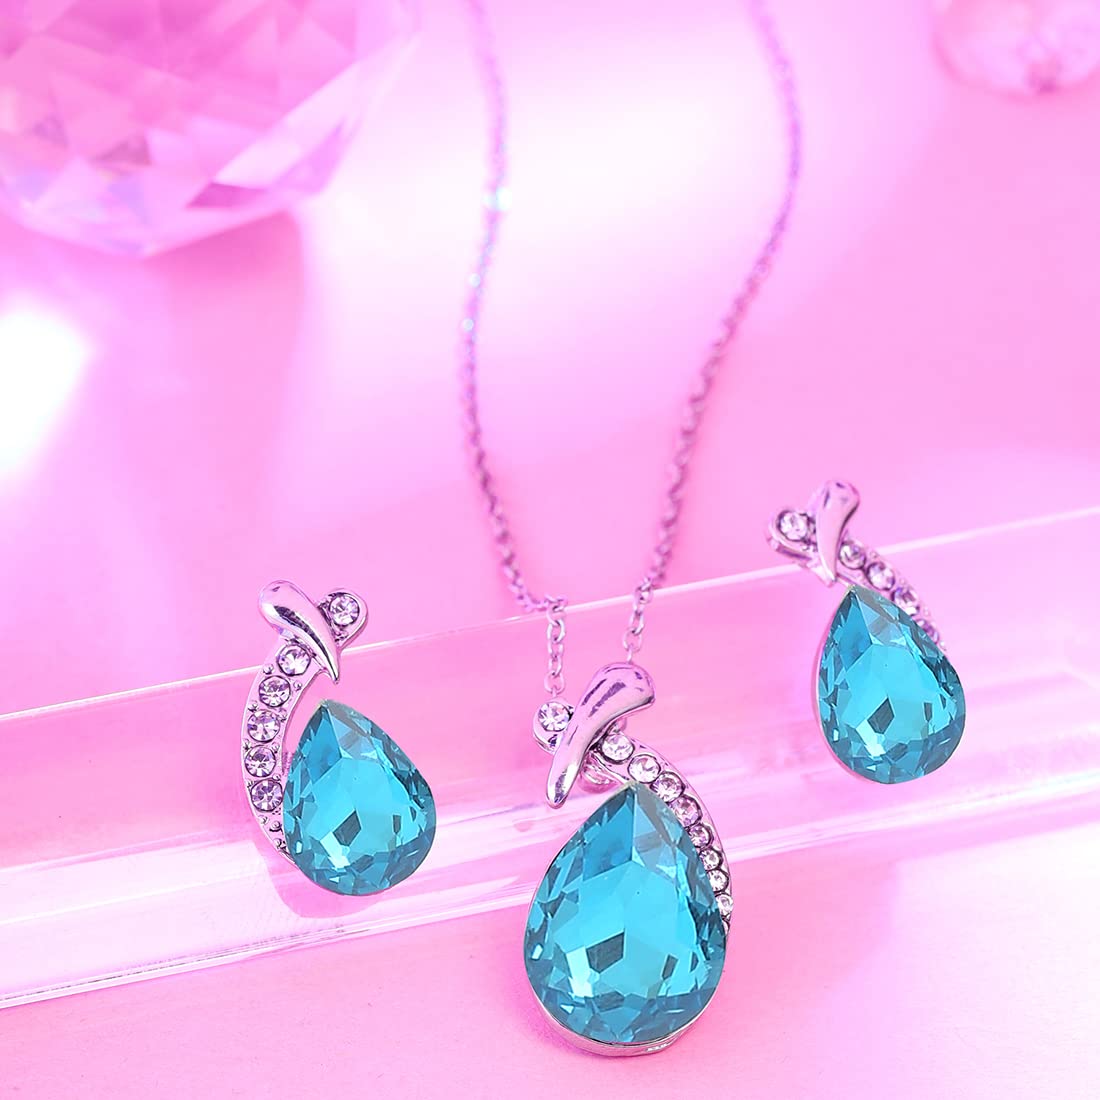 Yellow Chimes Pendant Set for Women and Girls Pendant for Women | Tear Drop Shaped Blue Crystal Pendent Chain| Birthday Gift for girls and women Anniversary Gift for Wife